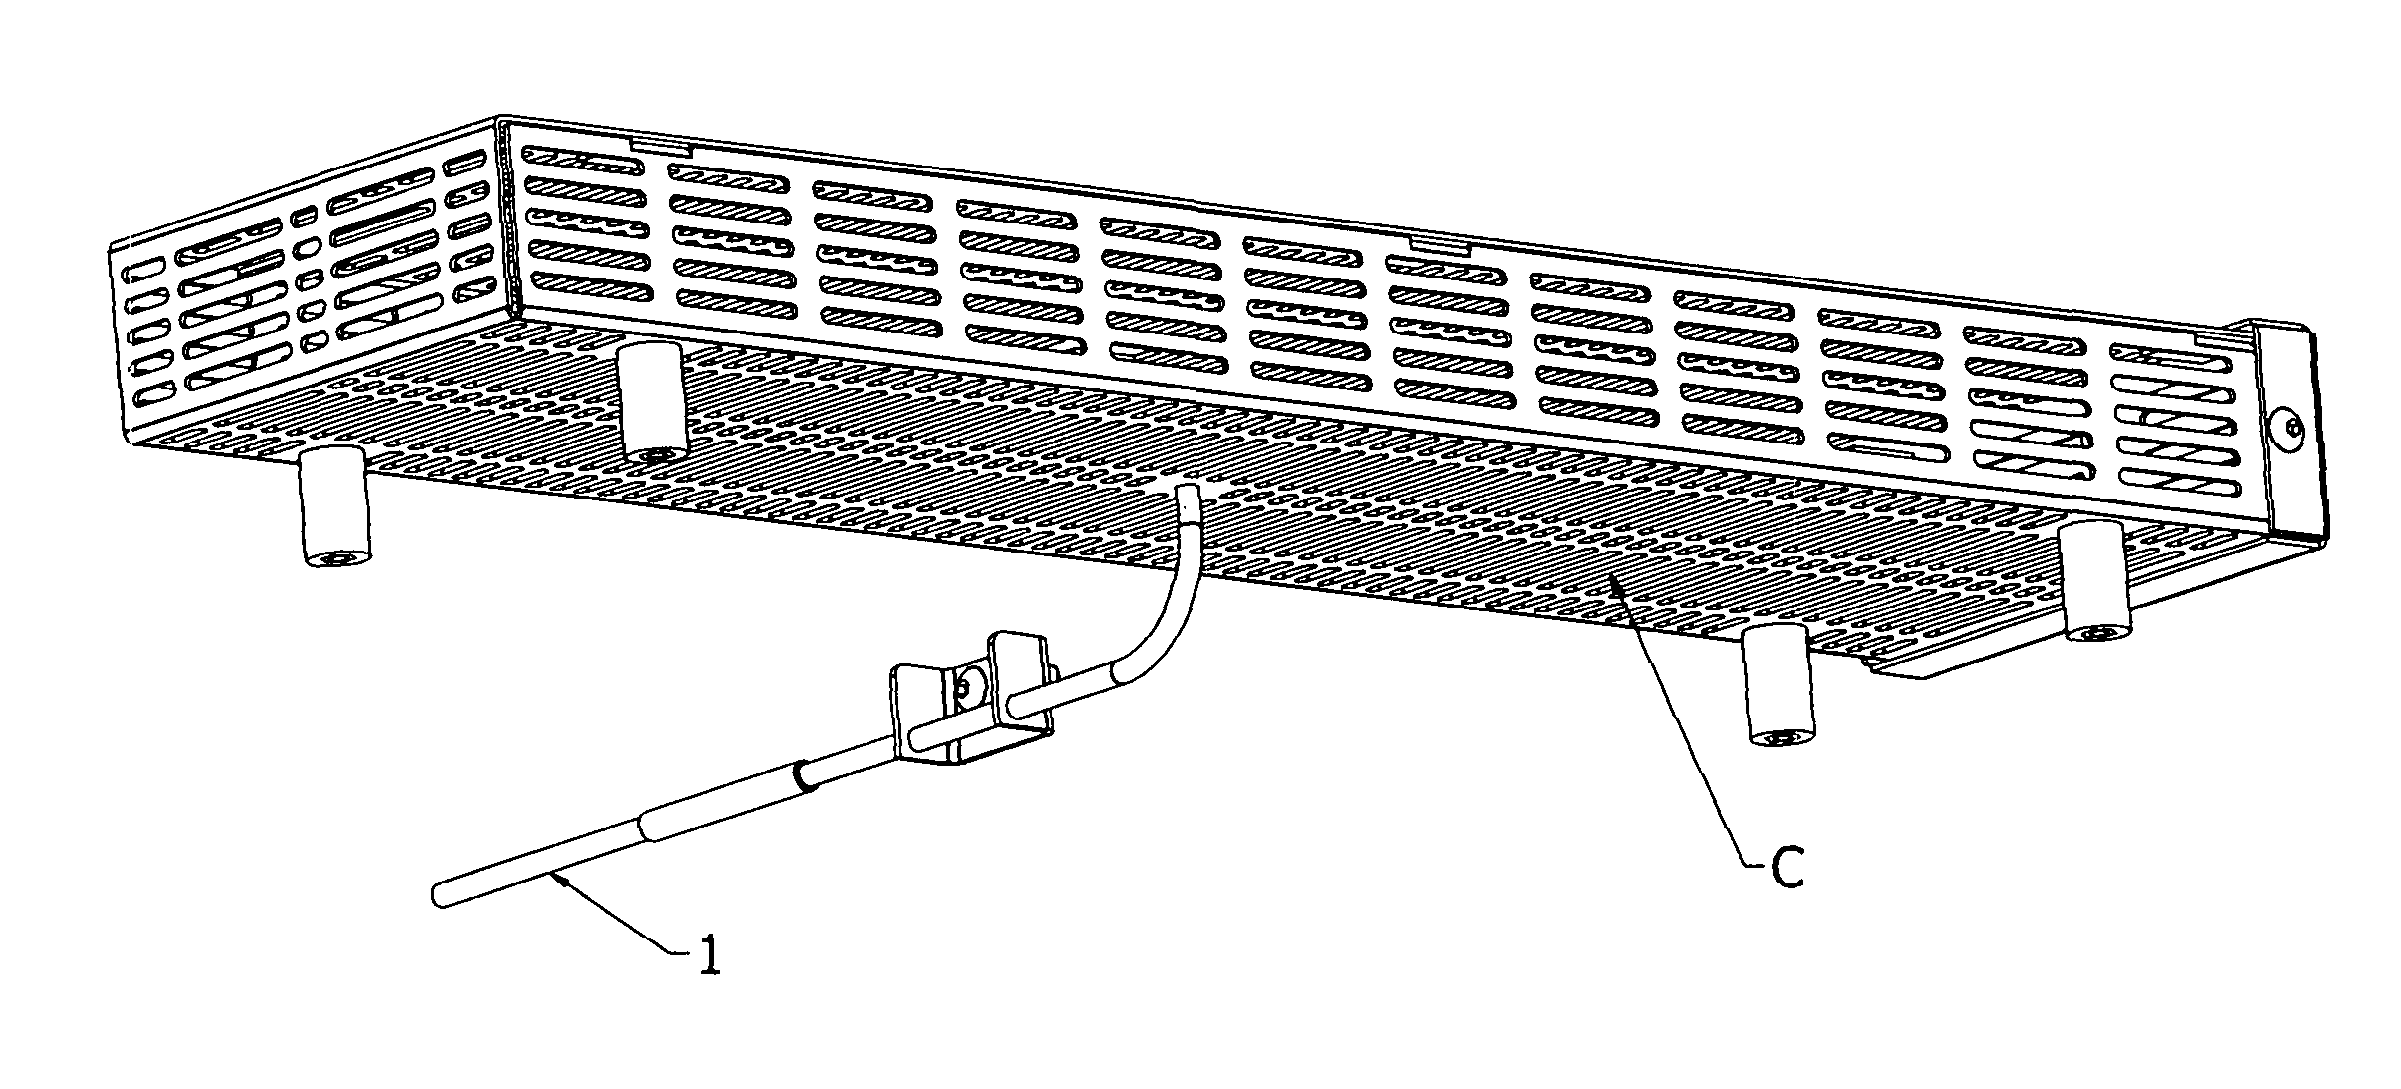 System and method for monitoring the atmosphere of an anaerobic workstation